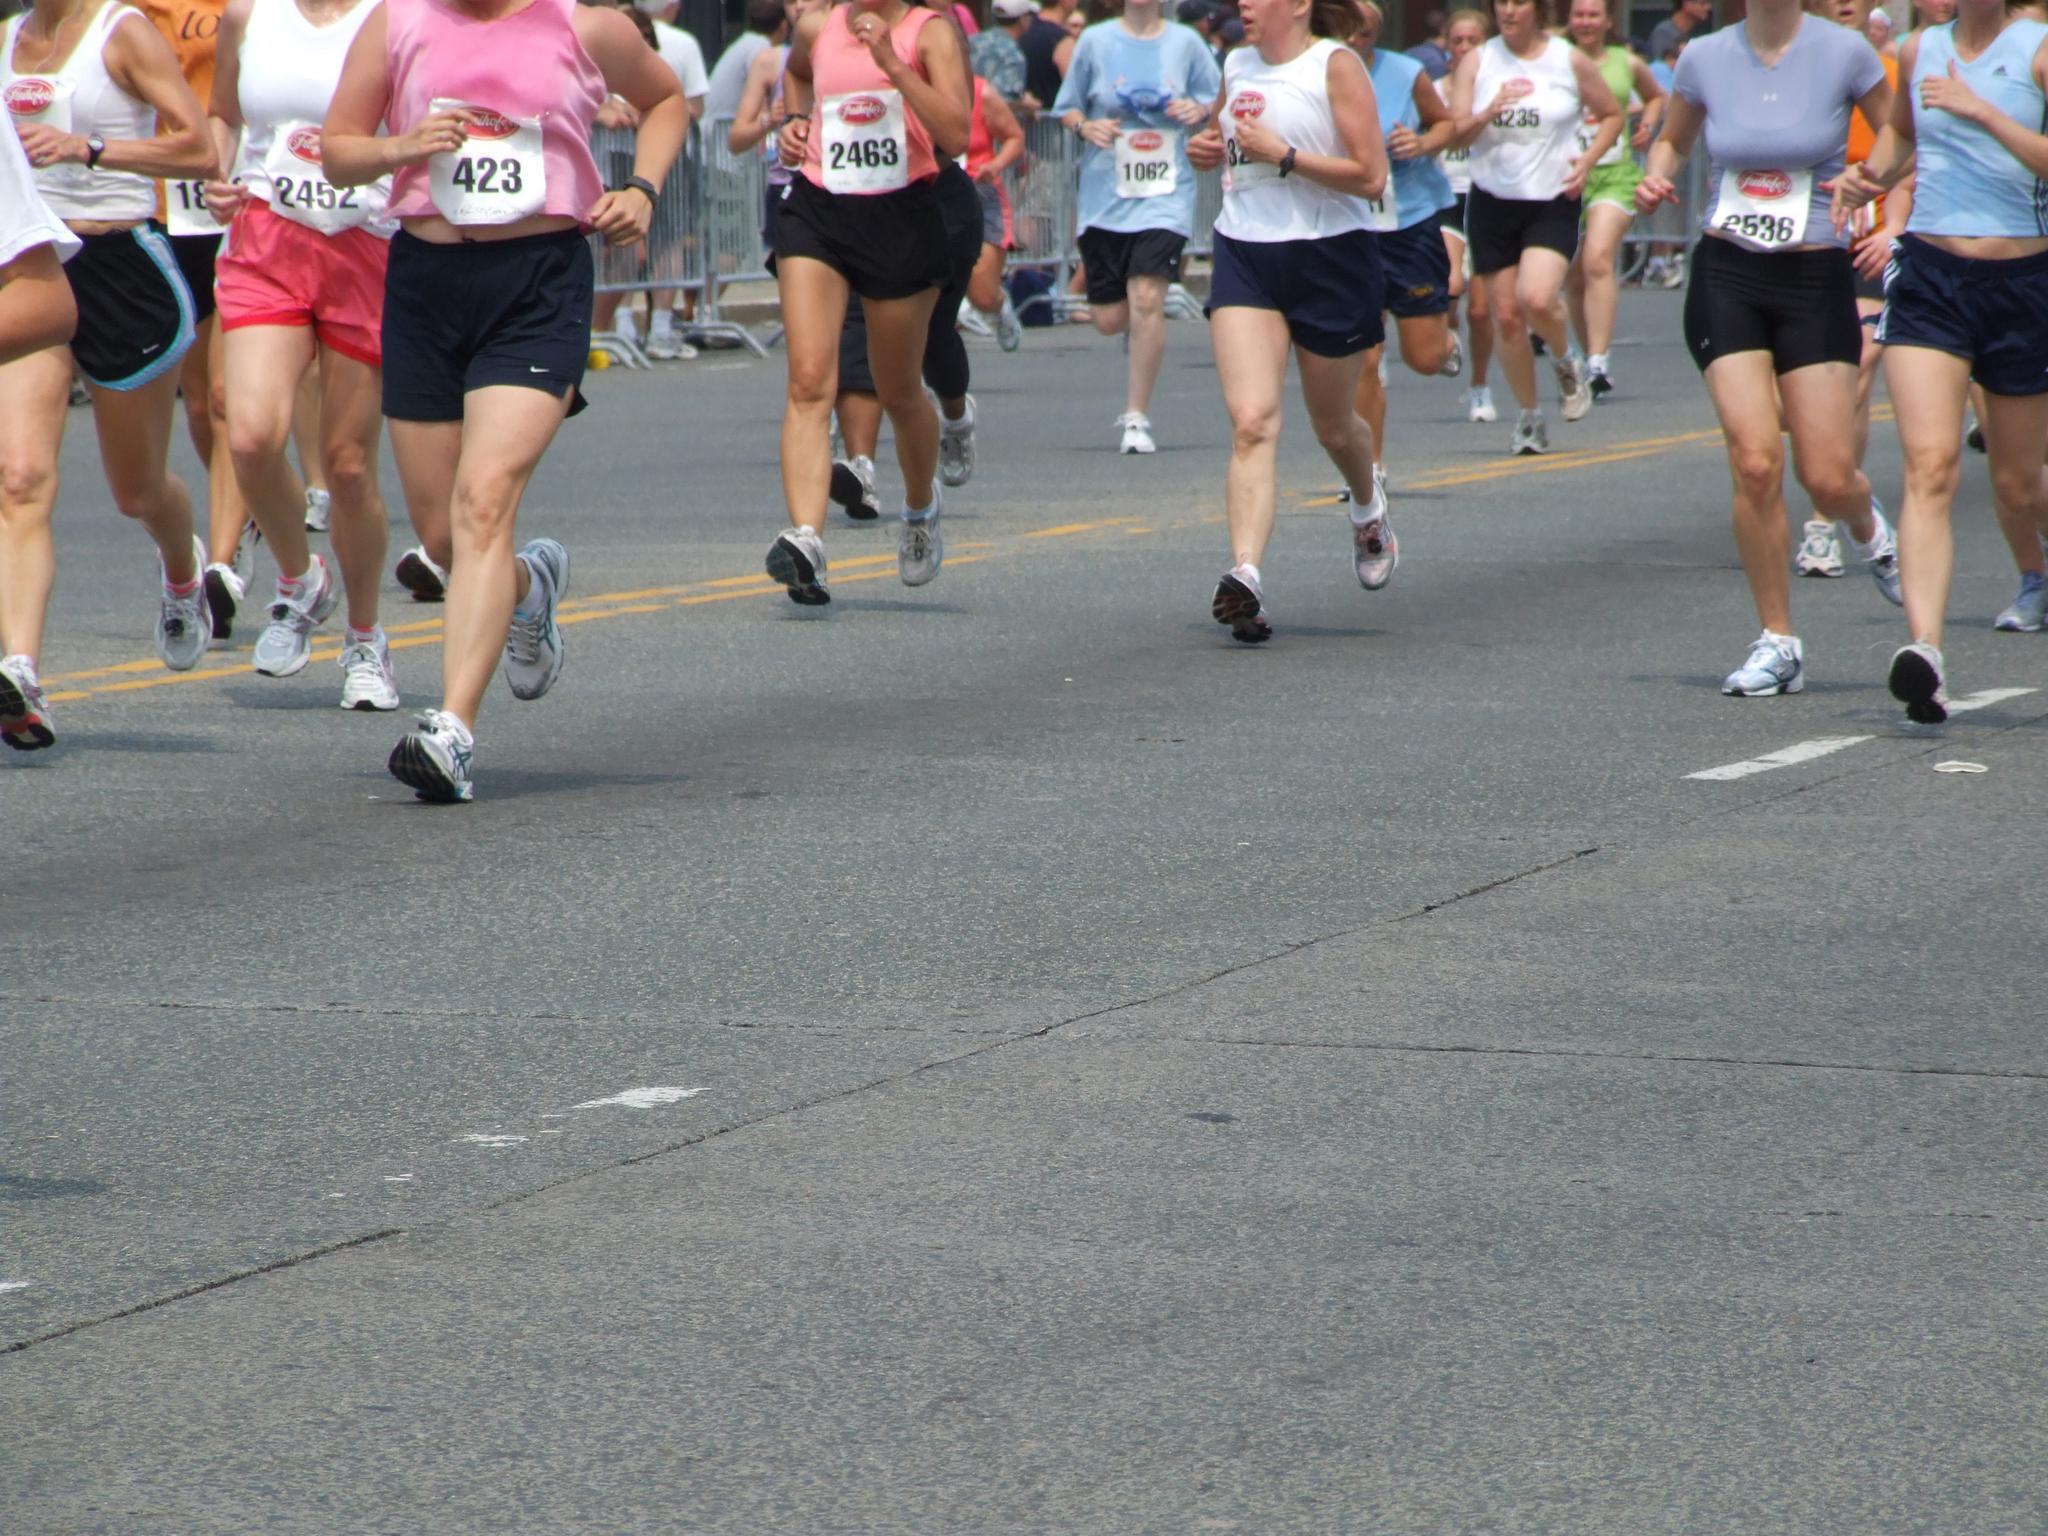 A group of runners in a road race visible from mid waist down.